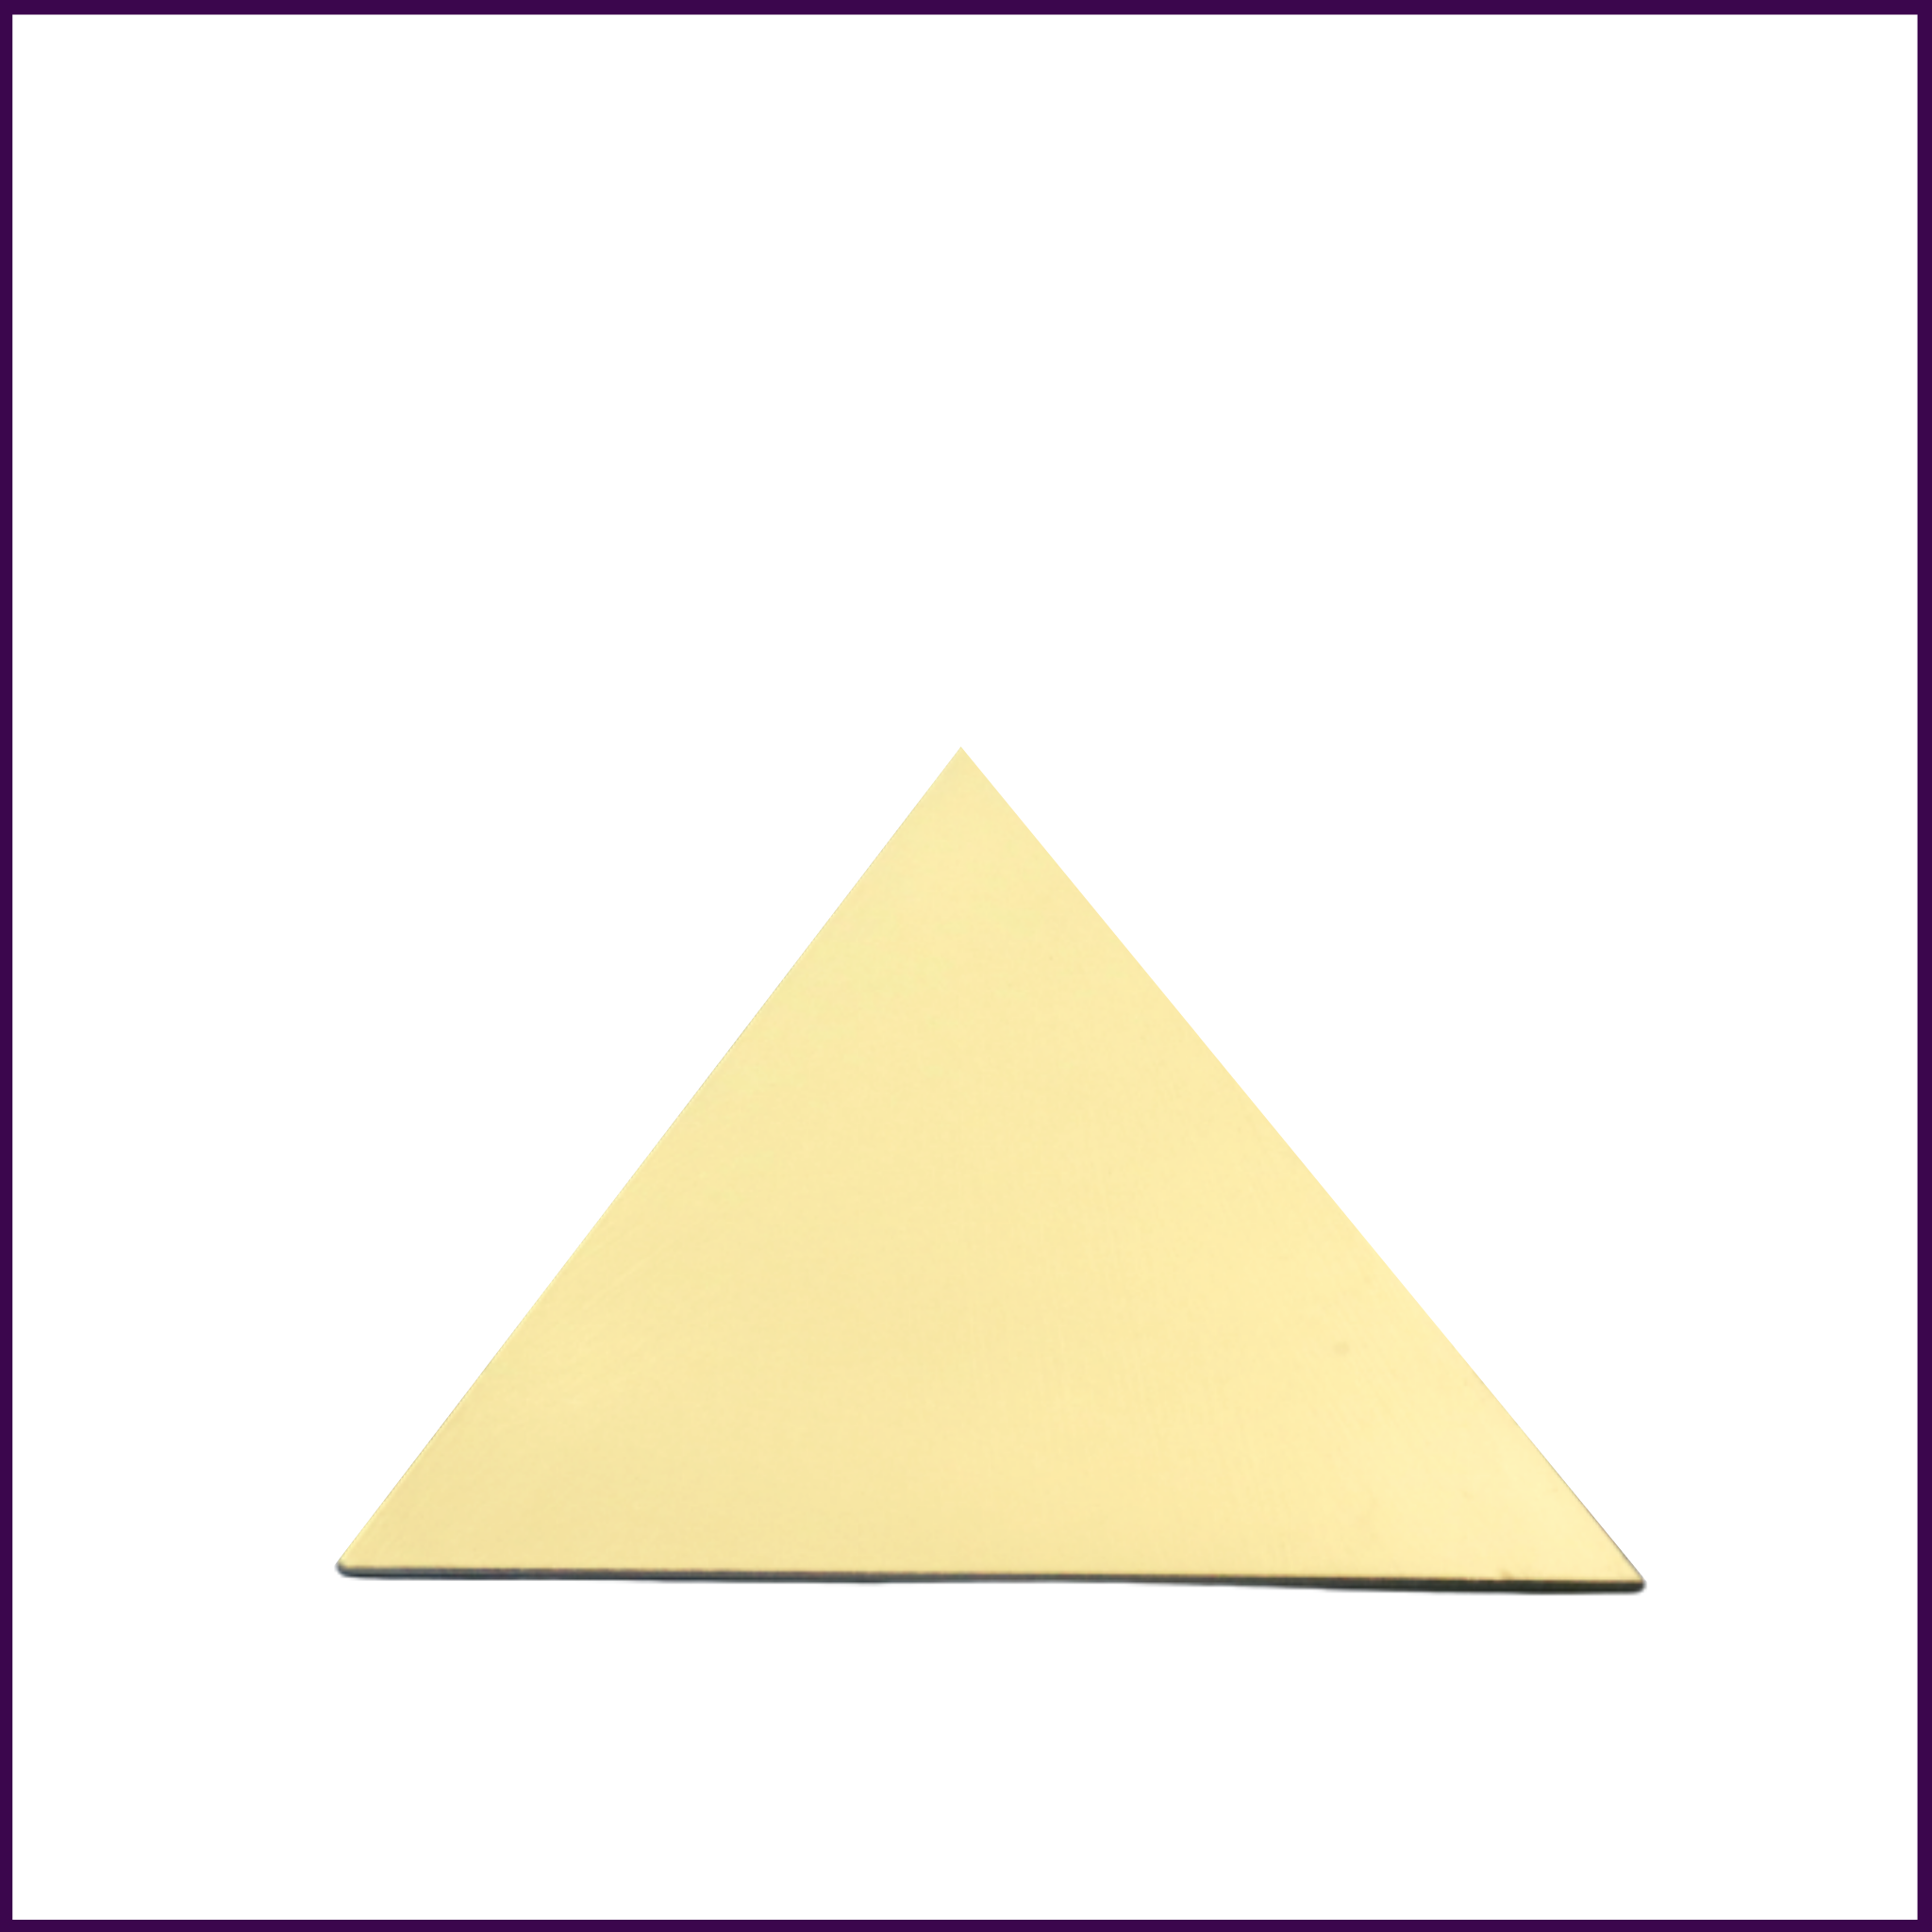 9inch MDF Wood Pyramid Head Cap for Meditation (Gold Painted) - 51pyramids